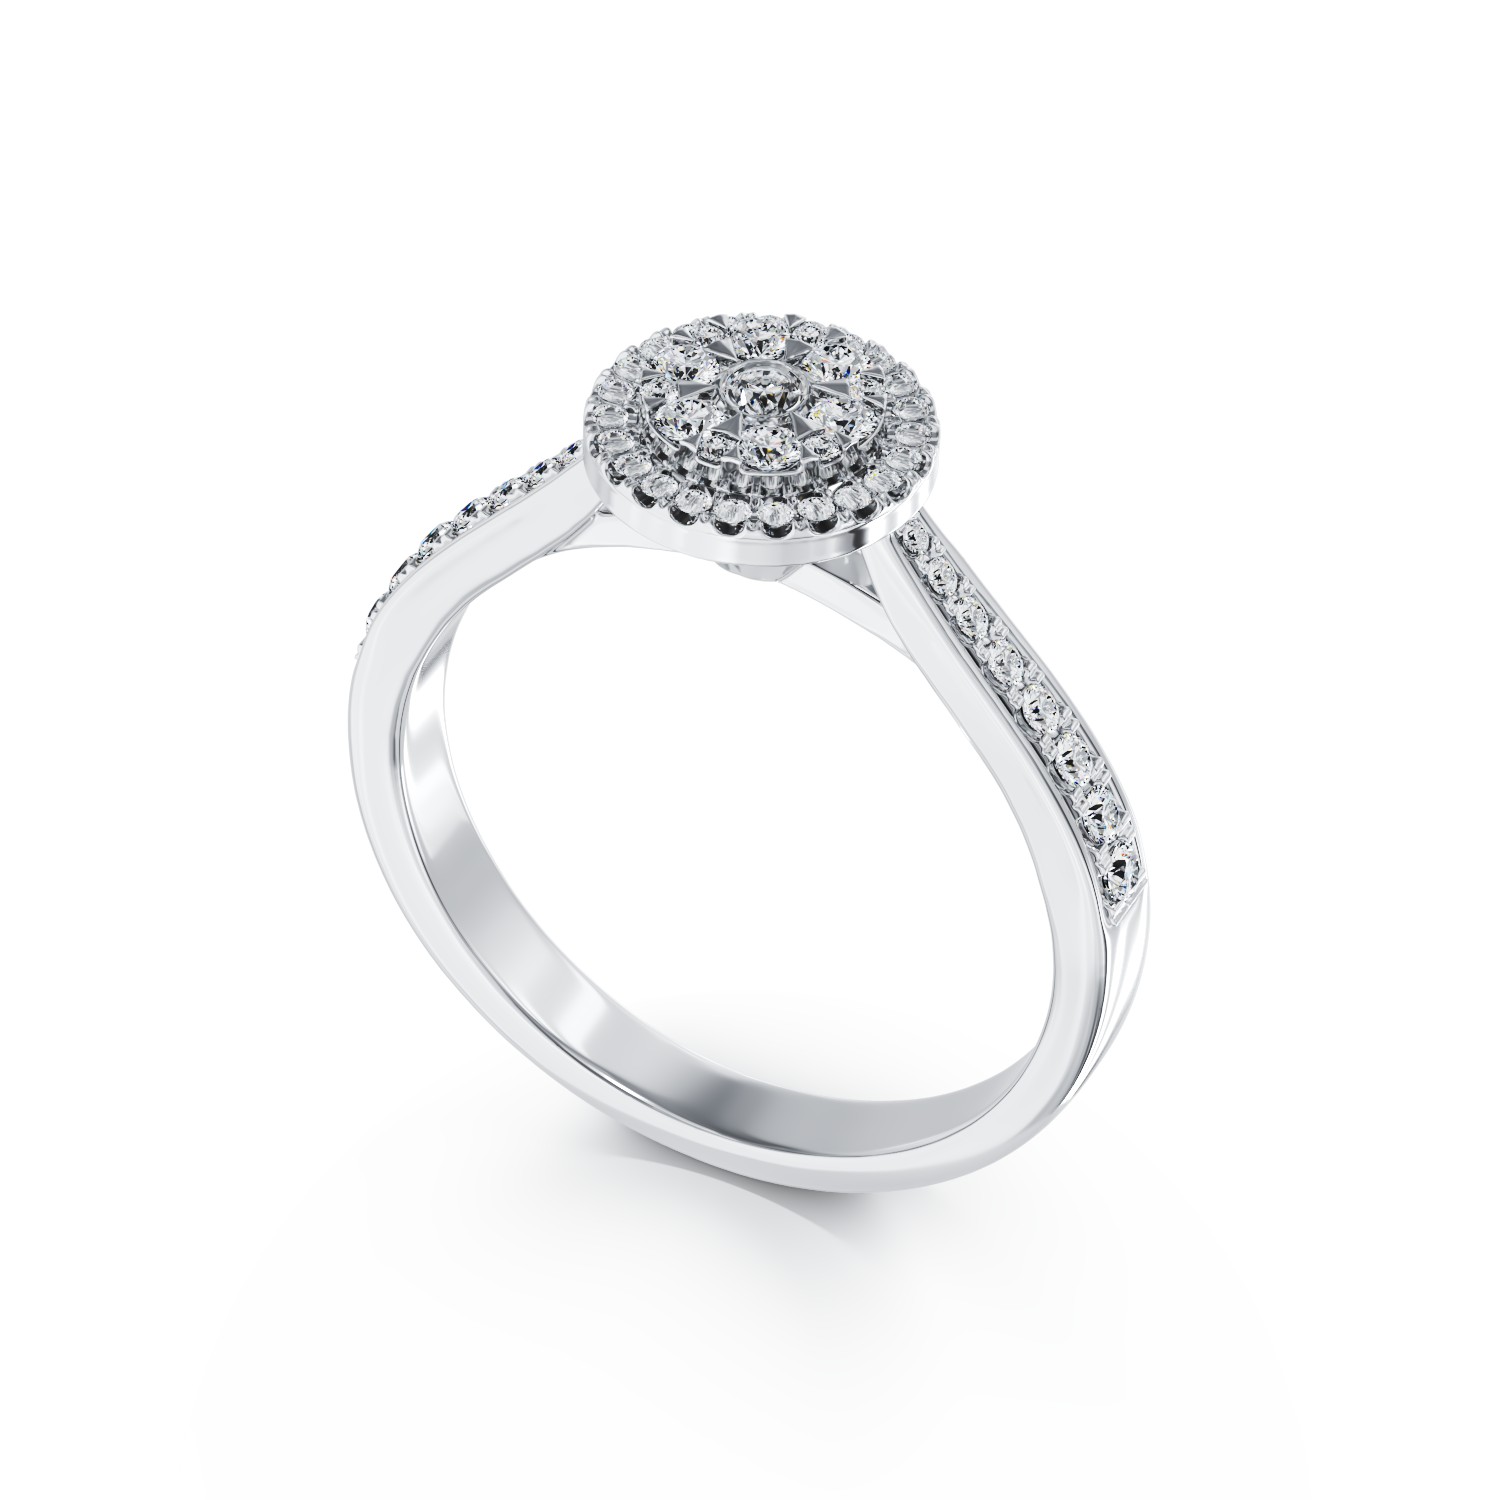 18K white gold engagement ring with 0.434ct diamonds